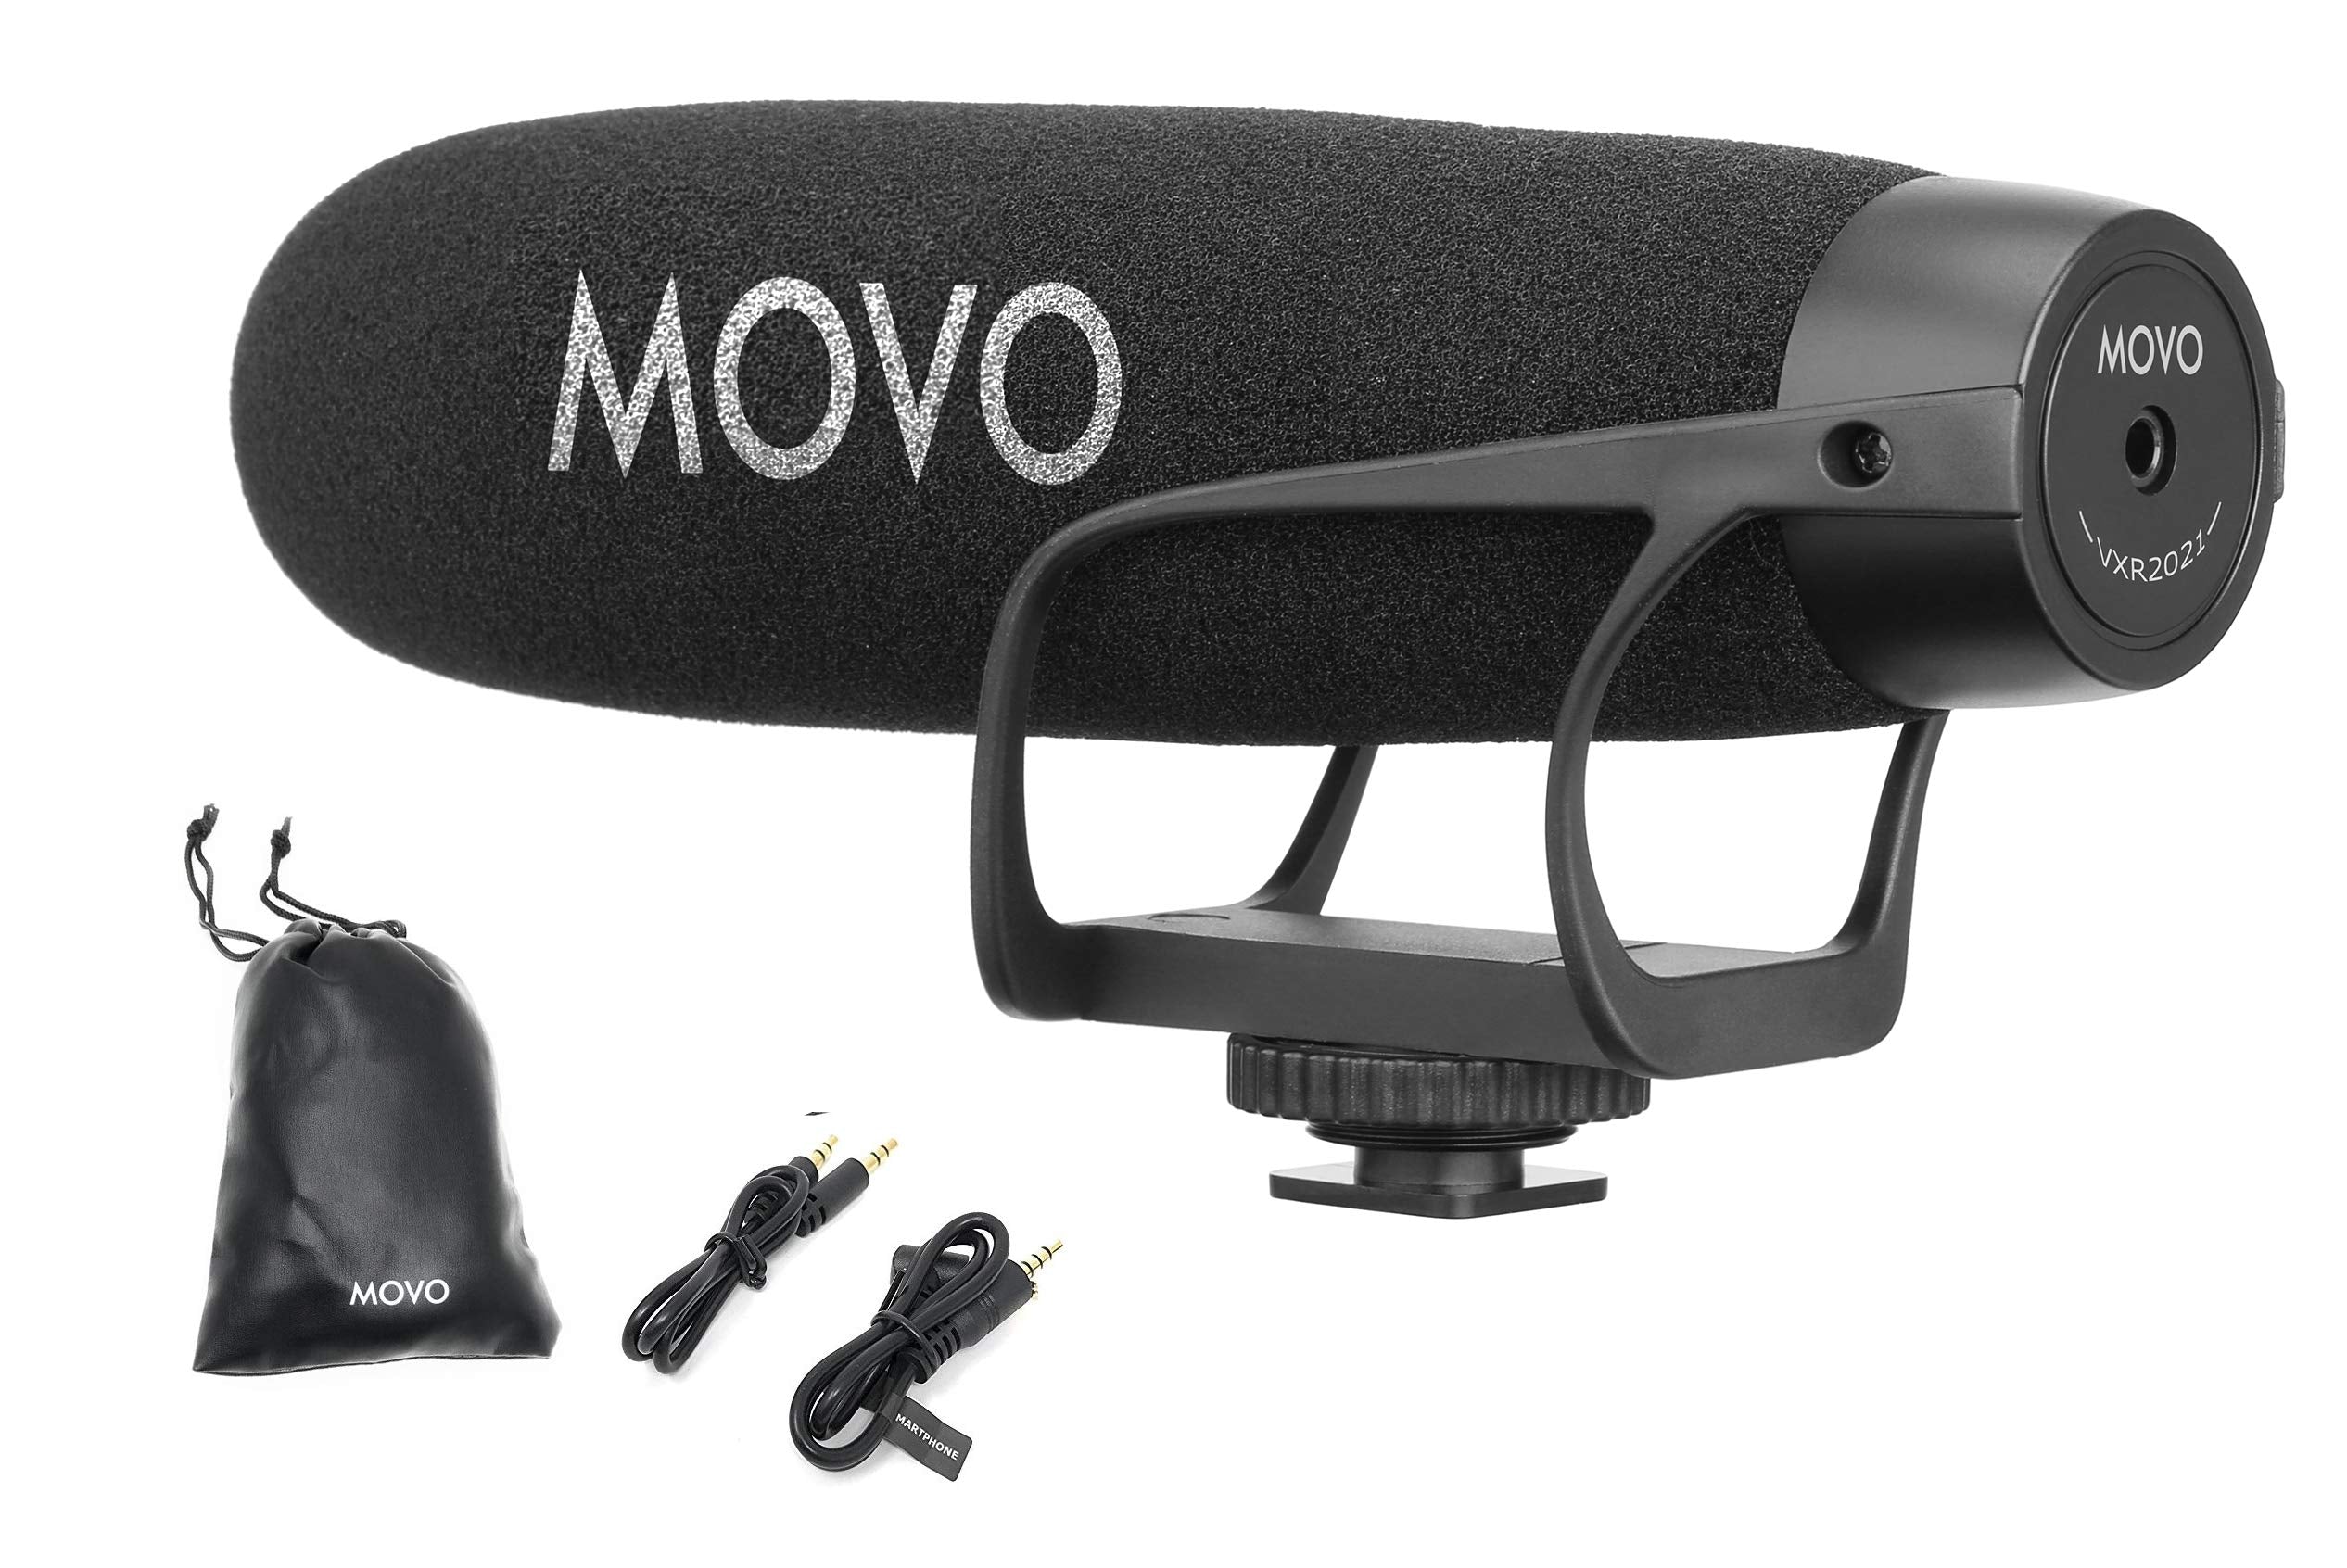 Movo VXR2021 Universal Supercardioid Condenser Shotgun Microphone Compatible with iPhone, Android Smartphones and Tablets. DSLR, Mirrorless Cameras, Camcorders, Recorders, Laptops, Computers and More  - Like New